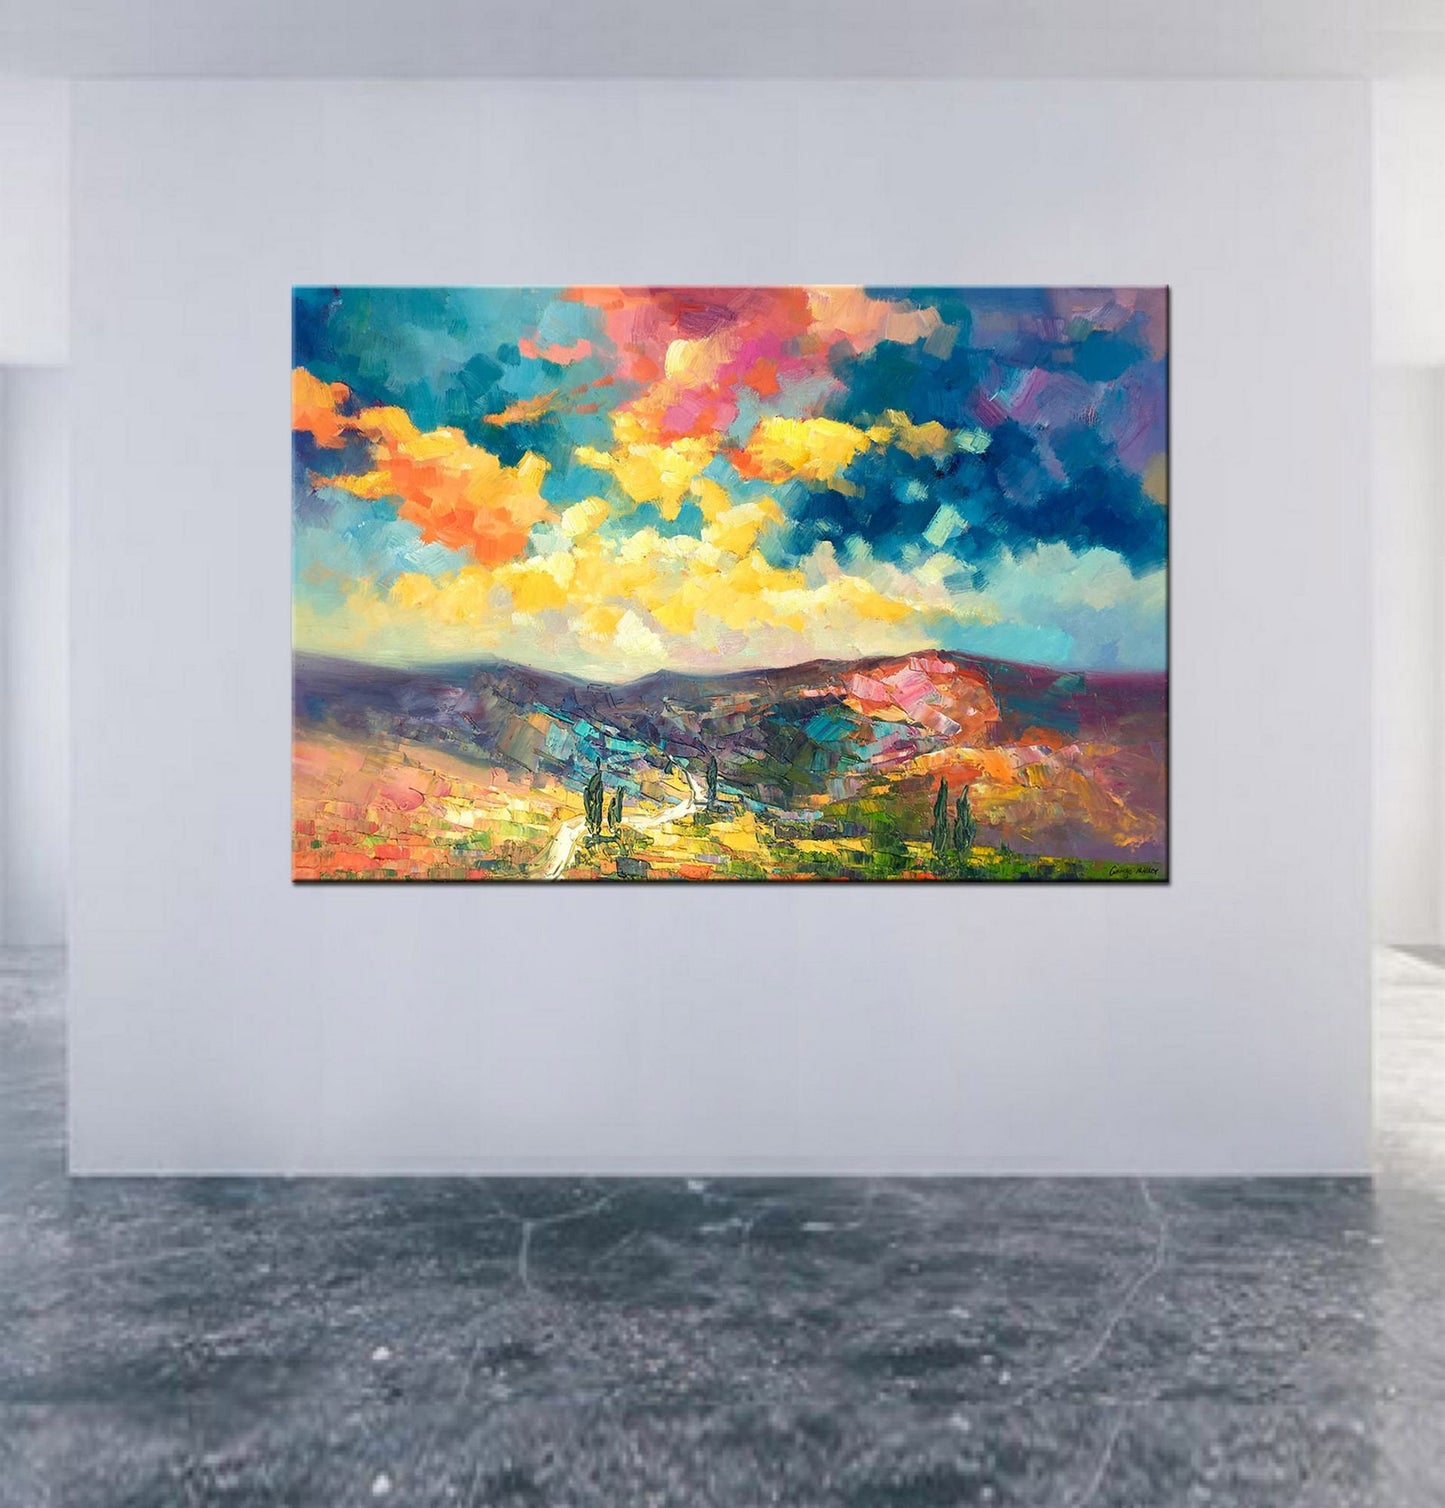 Large Landscape Painting, Original Oil Painting, Wall Decor, Painting Abstract, Living Room Decor, Large Canvas Painting, Canvas Art